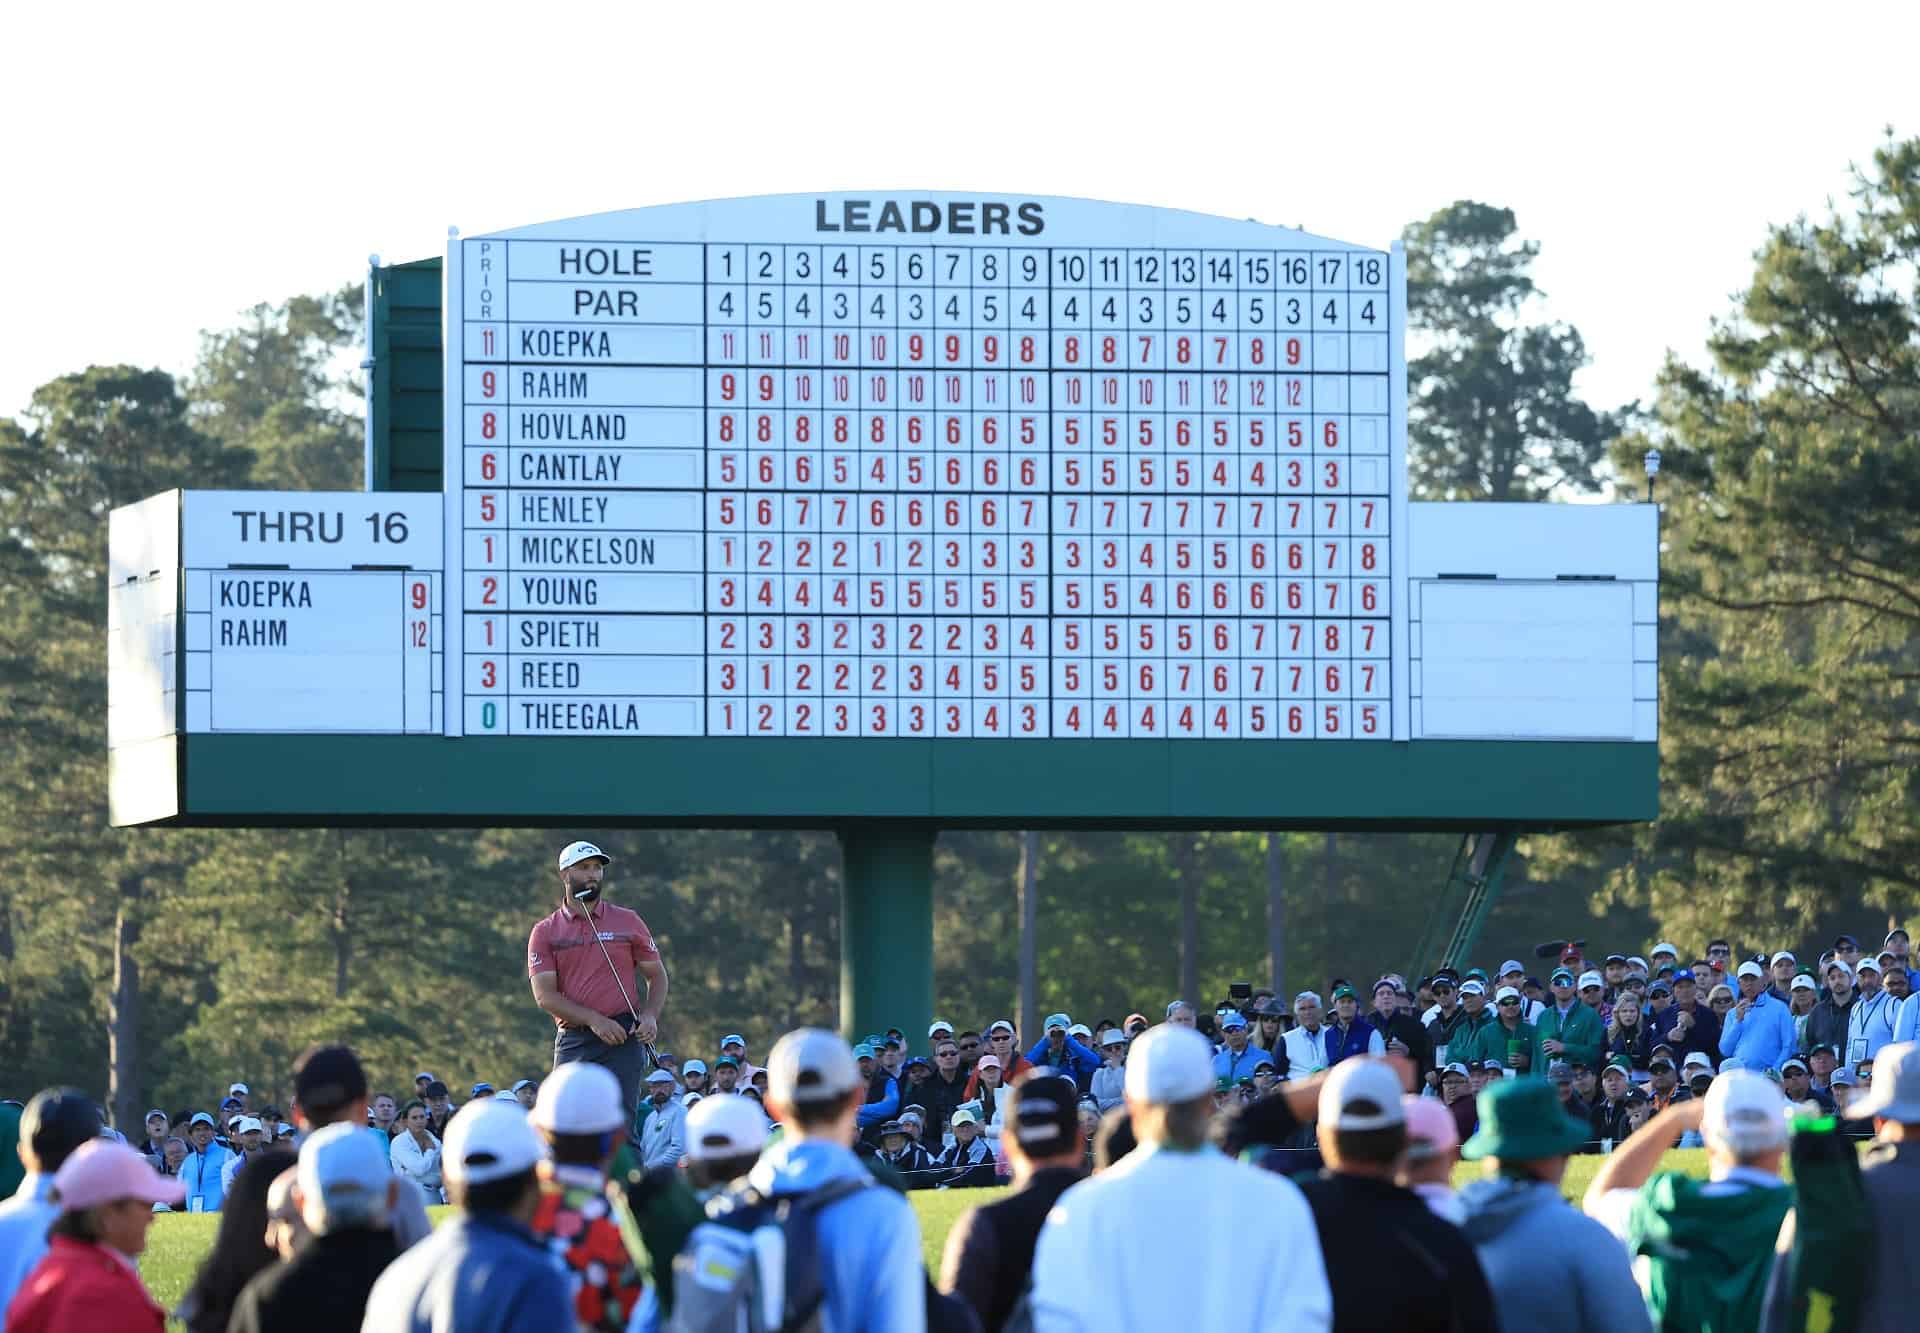 Jon Rahm earned $3.2 million for first Masters win at Augusta